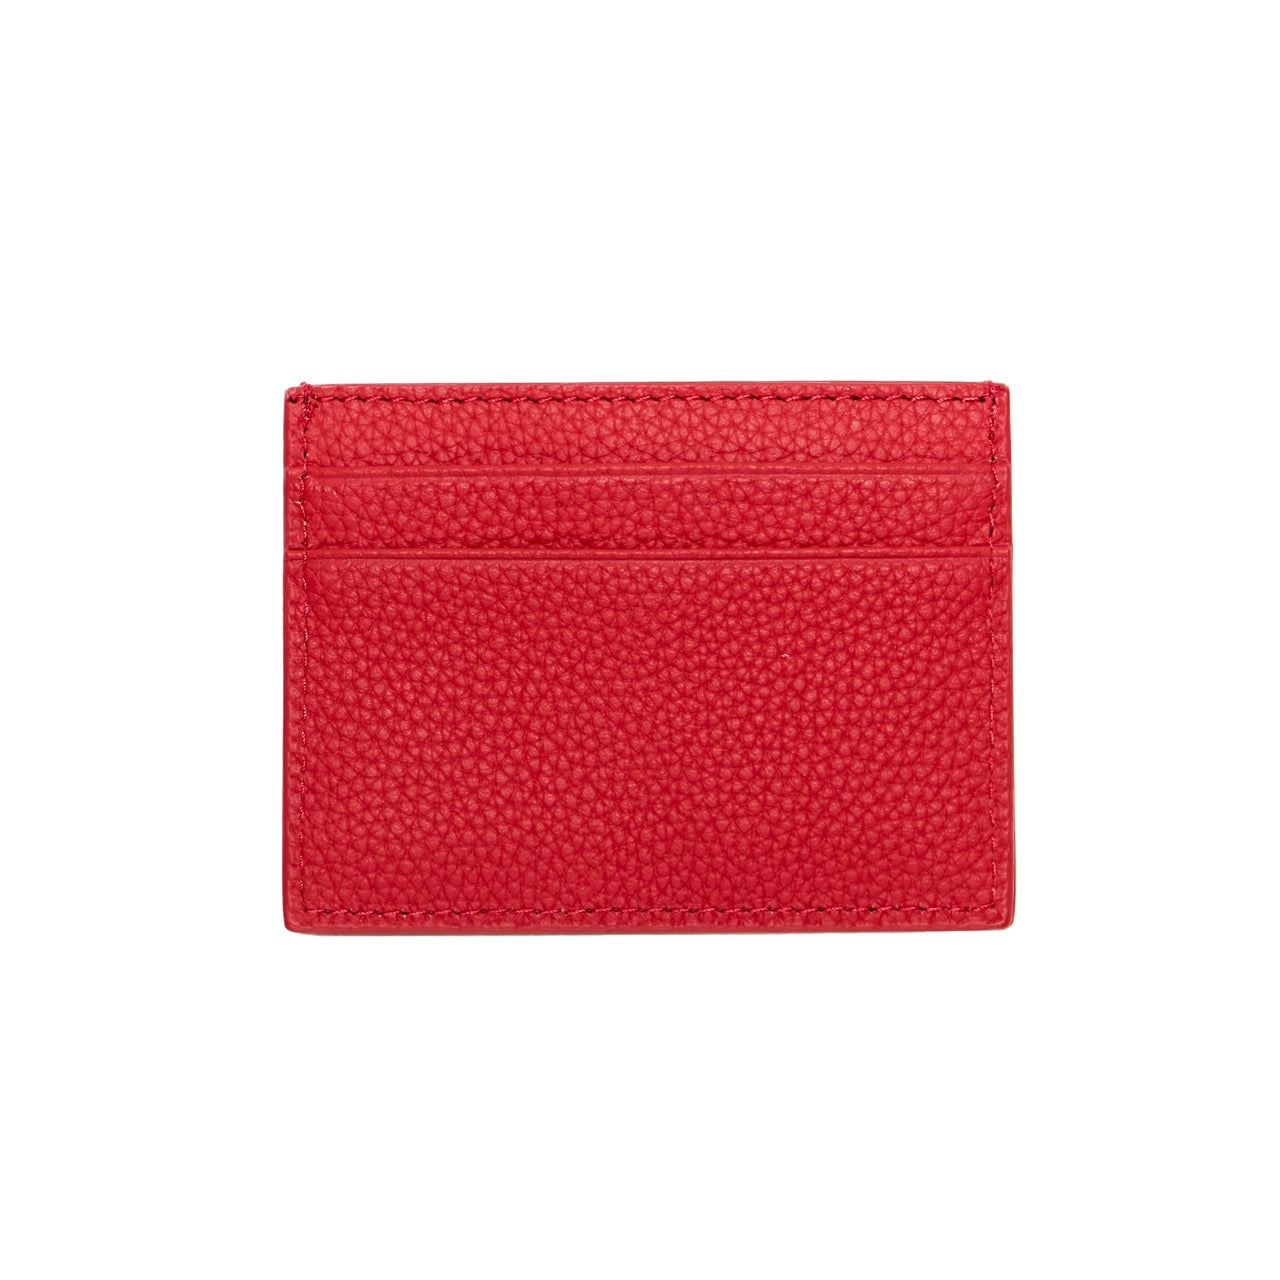 Elevate Your Essentials: Ivory & Ebony Red Card Holder - 100% Genuine Leather, RFID Blocking - Stylish Security for Your Everyday Adventures!